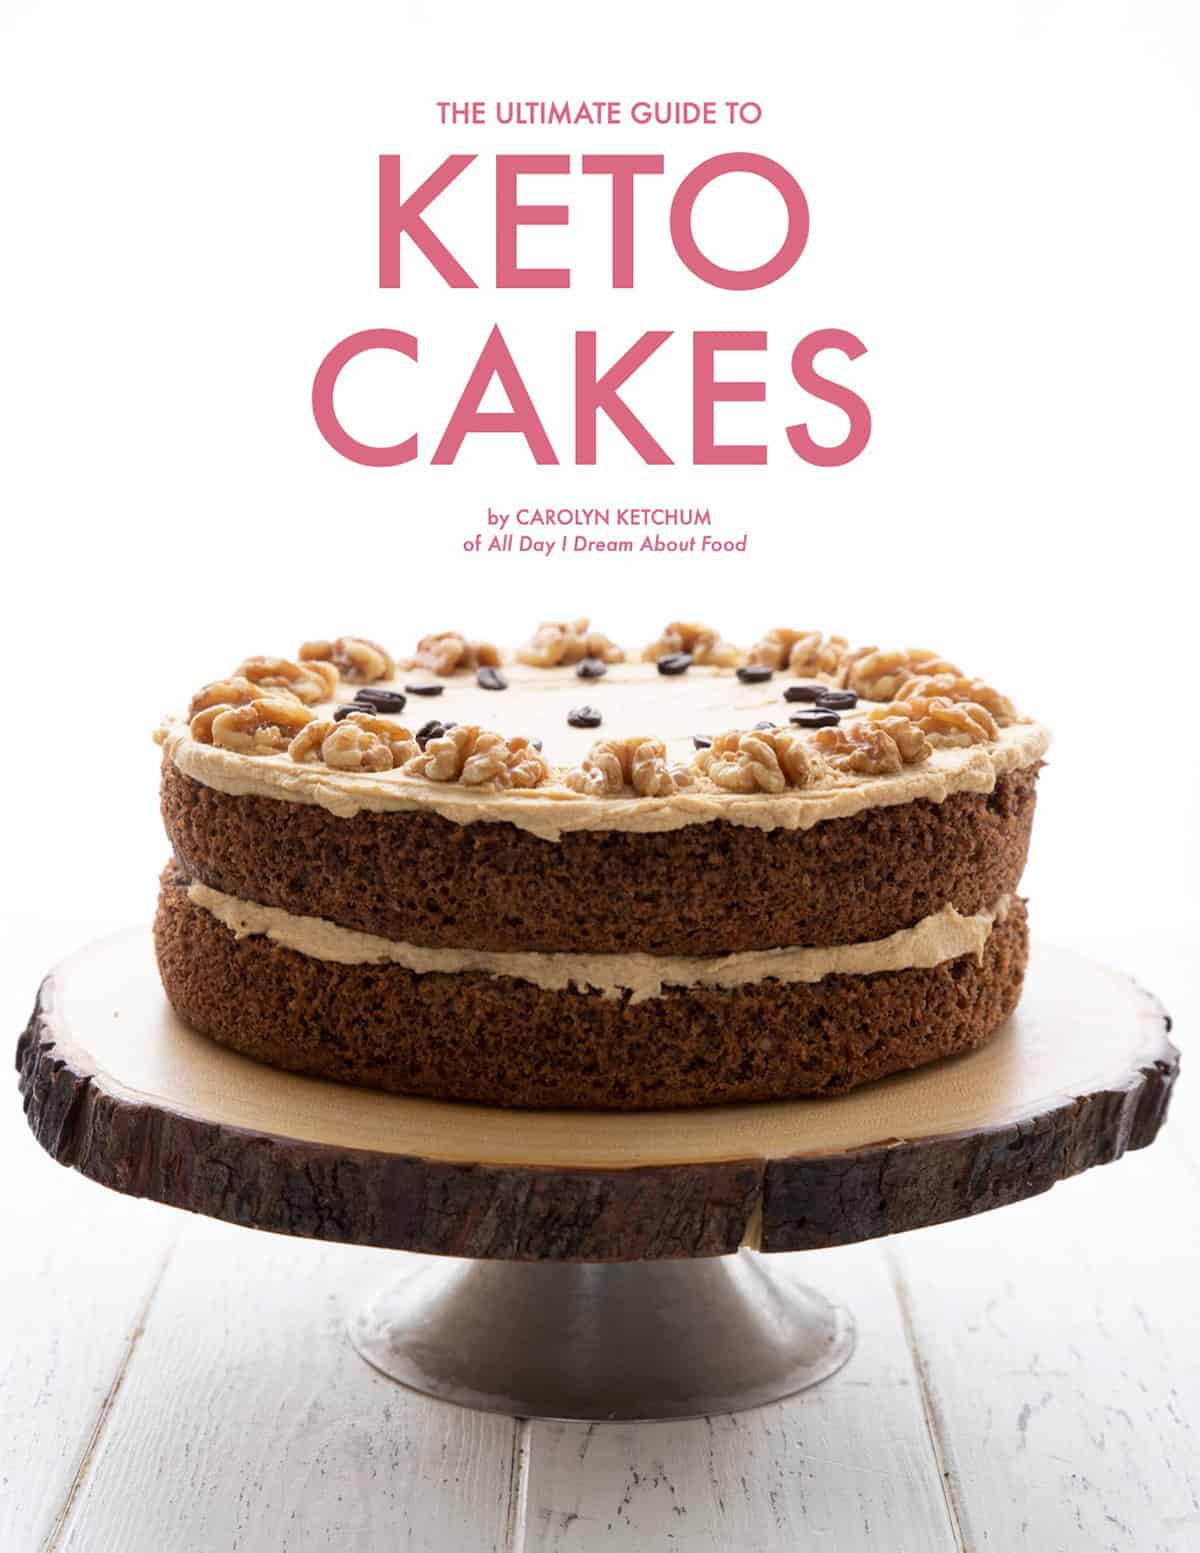 Cover image of The Ultimate Guide to Keto Cakes.